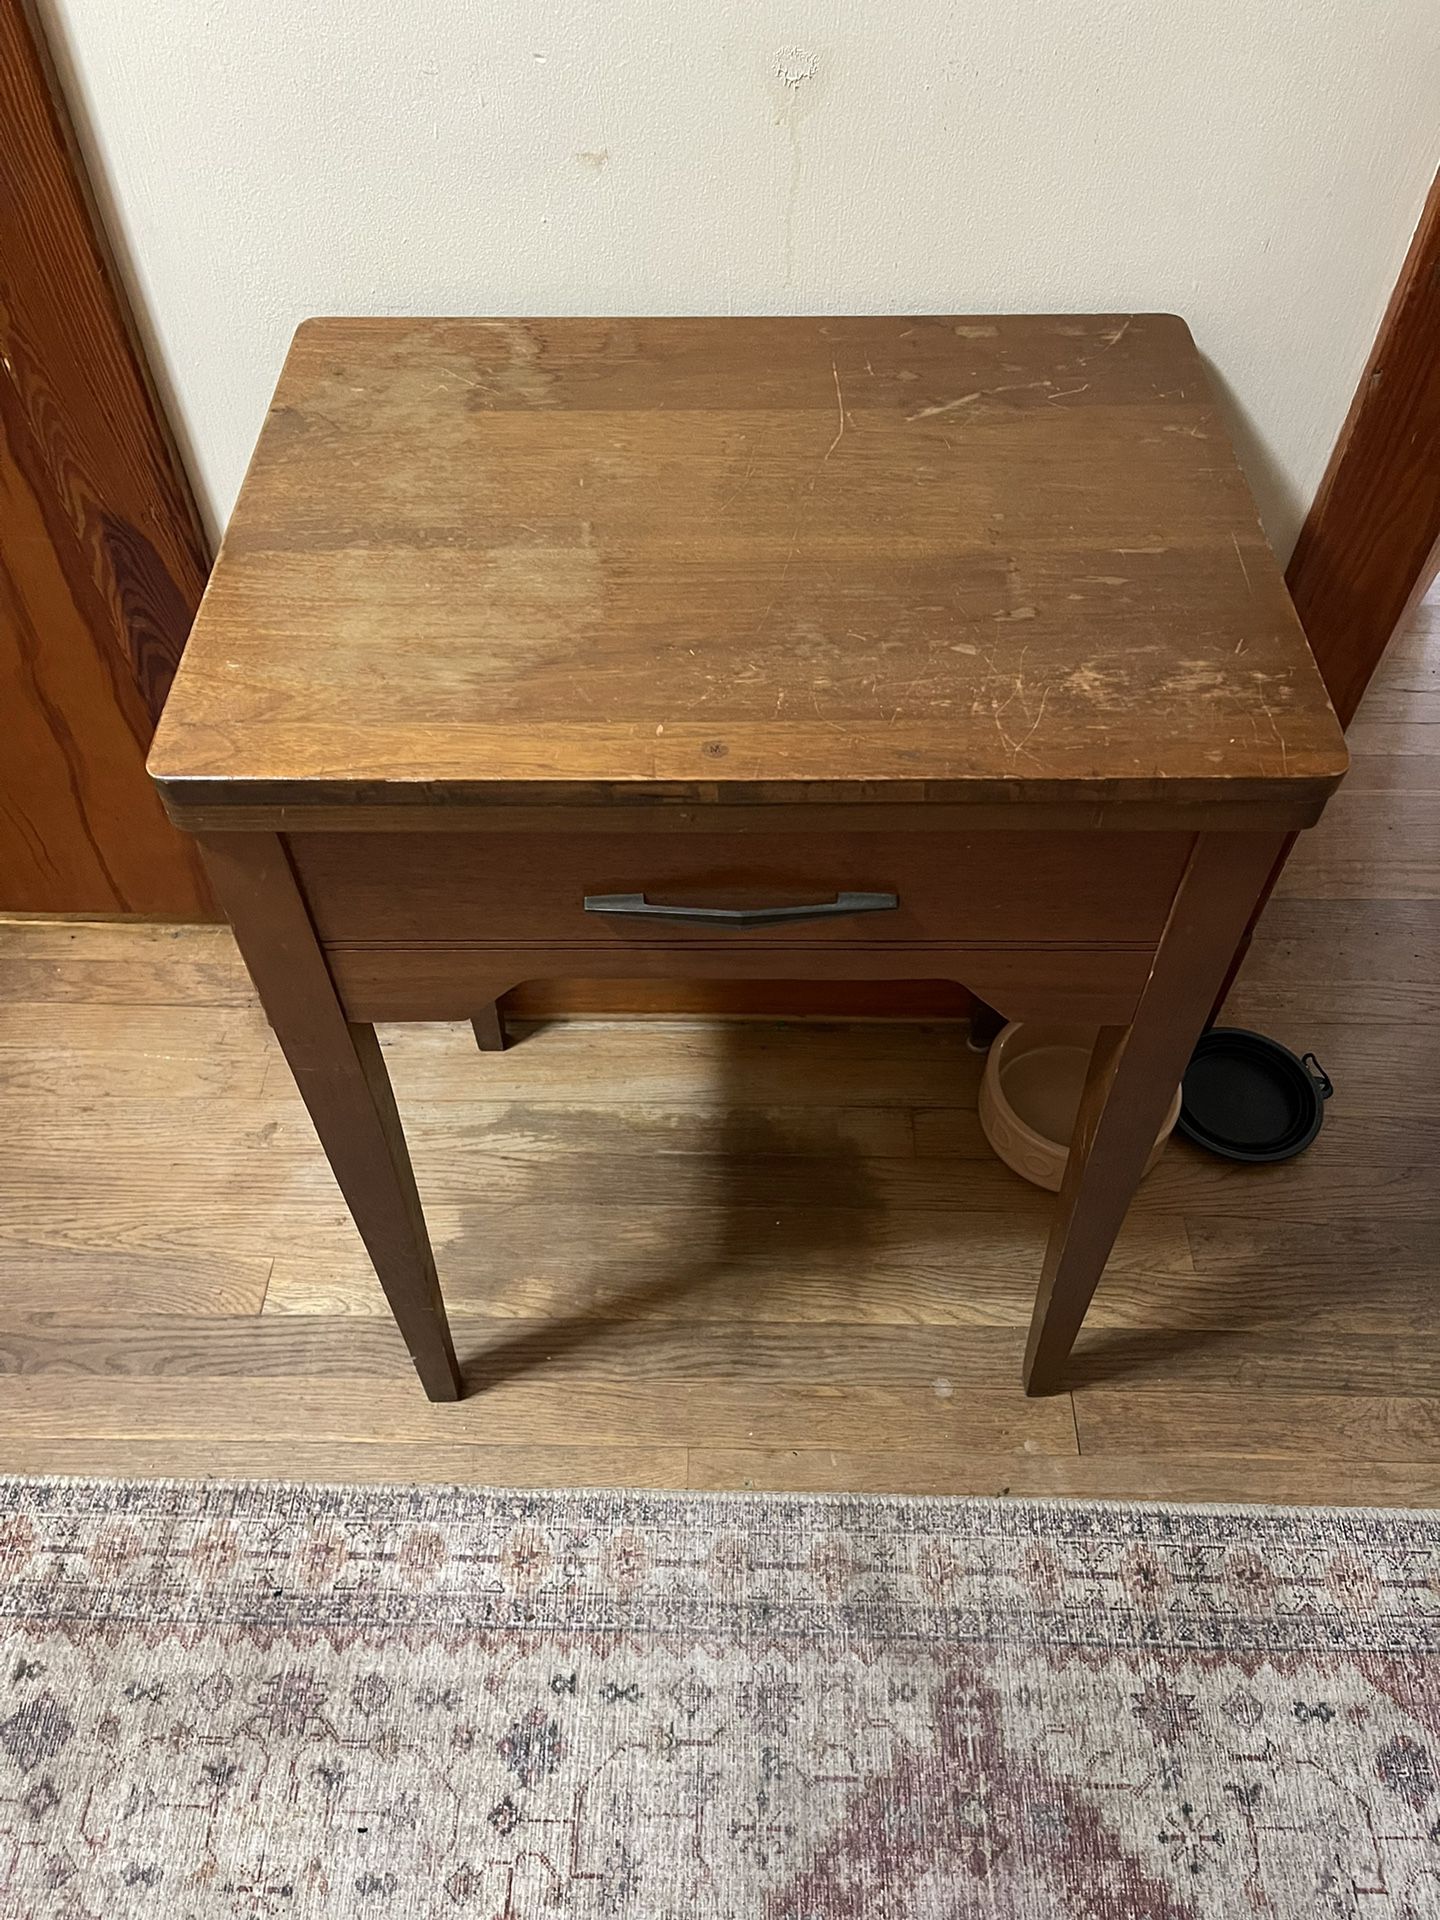 Sewing Table Desk